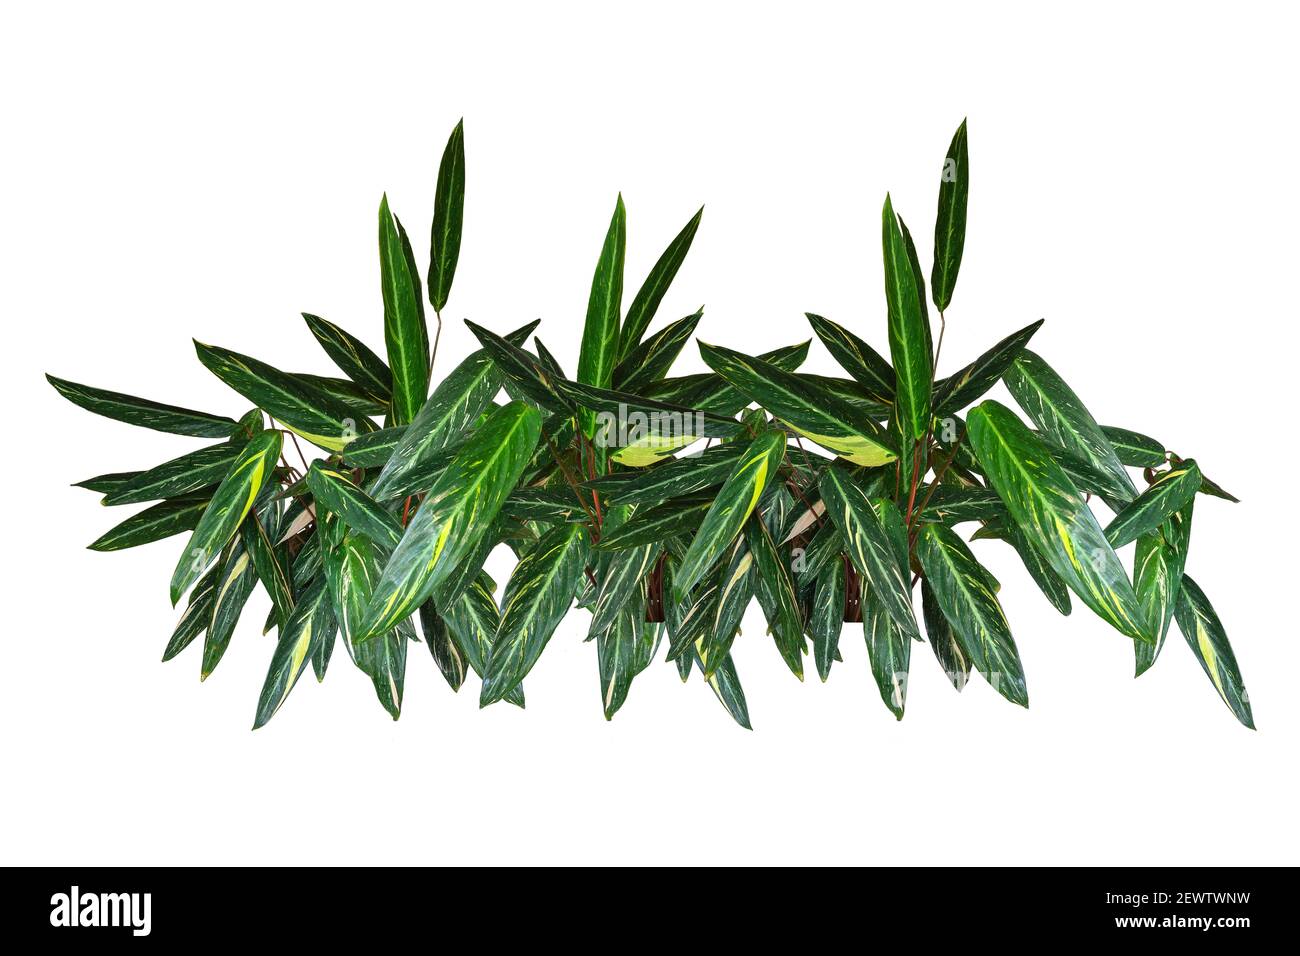 Garland of tropical plants Stromantha. Panoramic view. Isolated on white background. Stock Photo